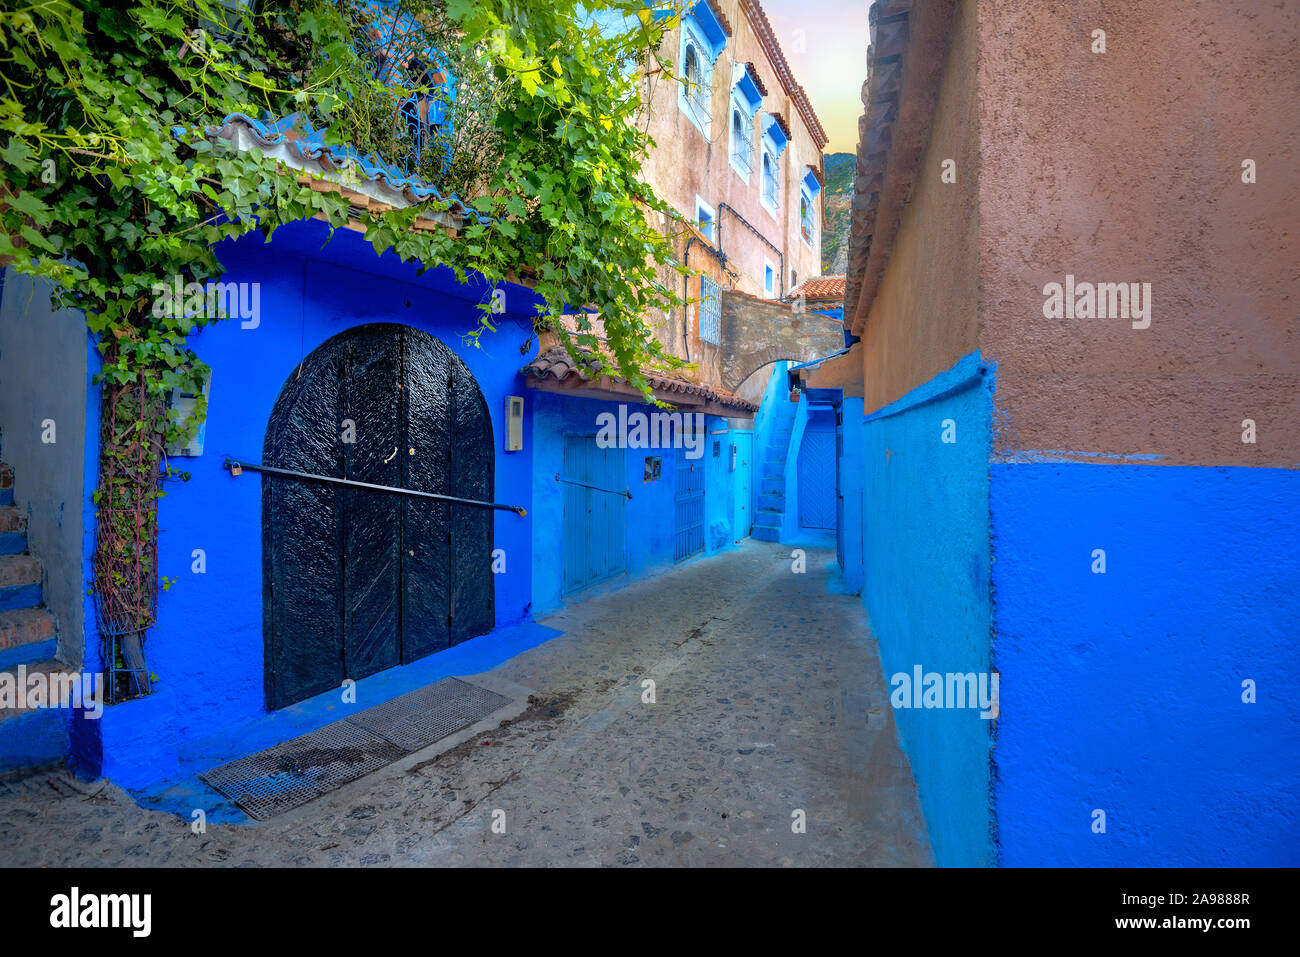 Narrow street with blue painted walls in old medina of Chefchaouen. Morocco, North Africa Stock Photo